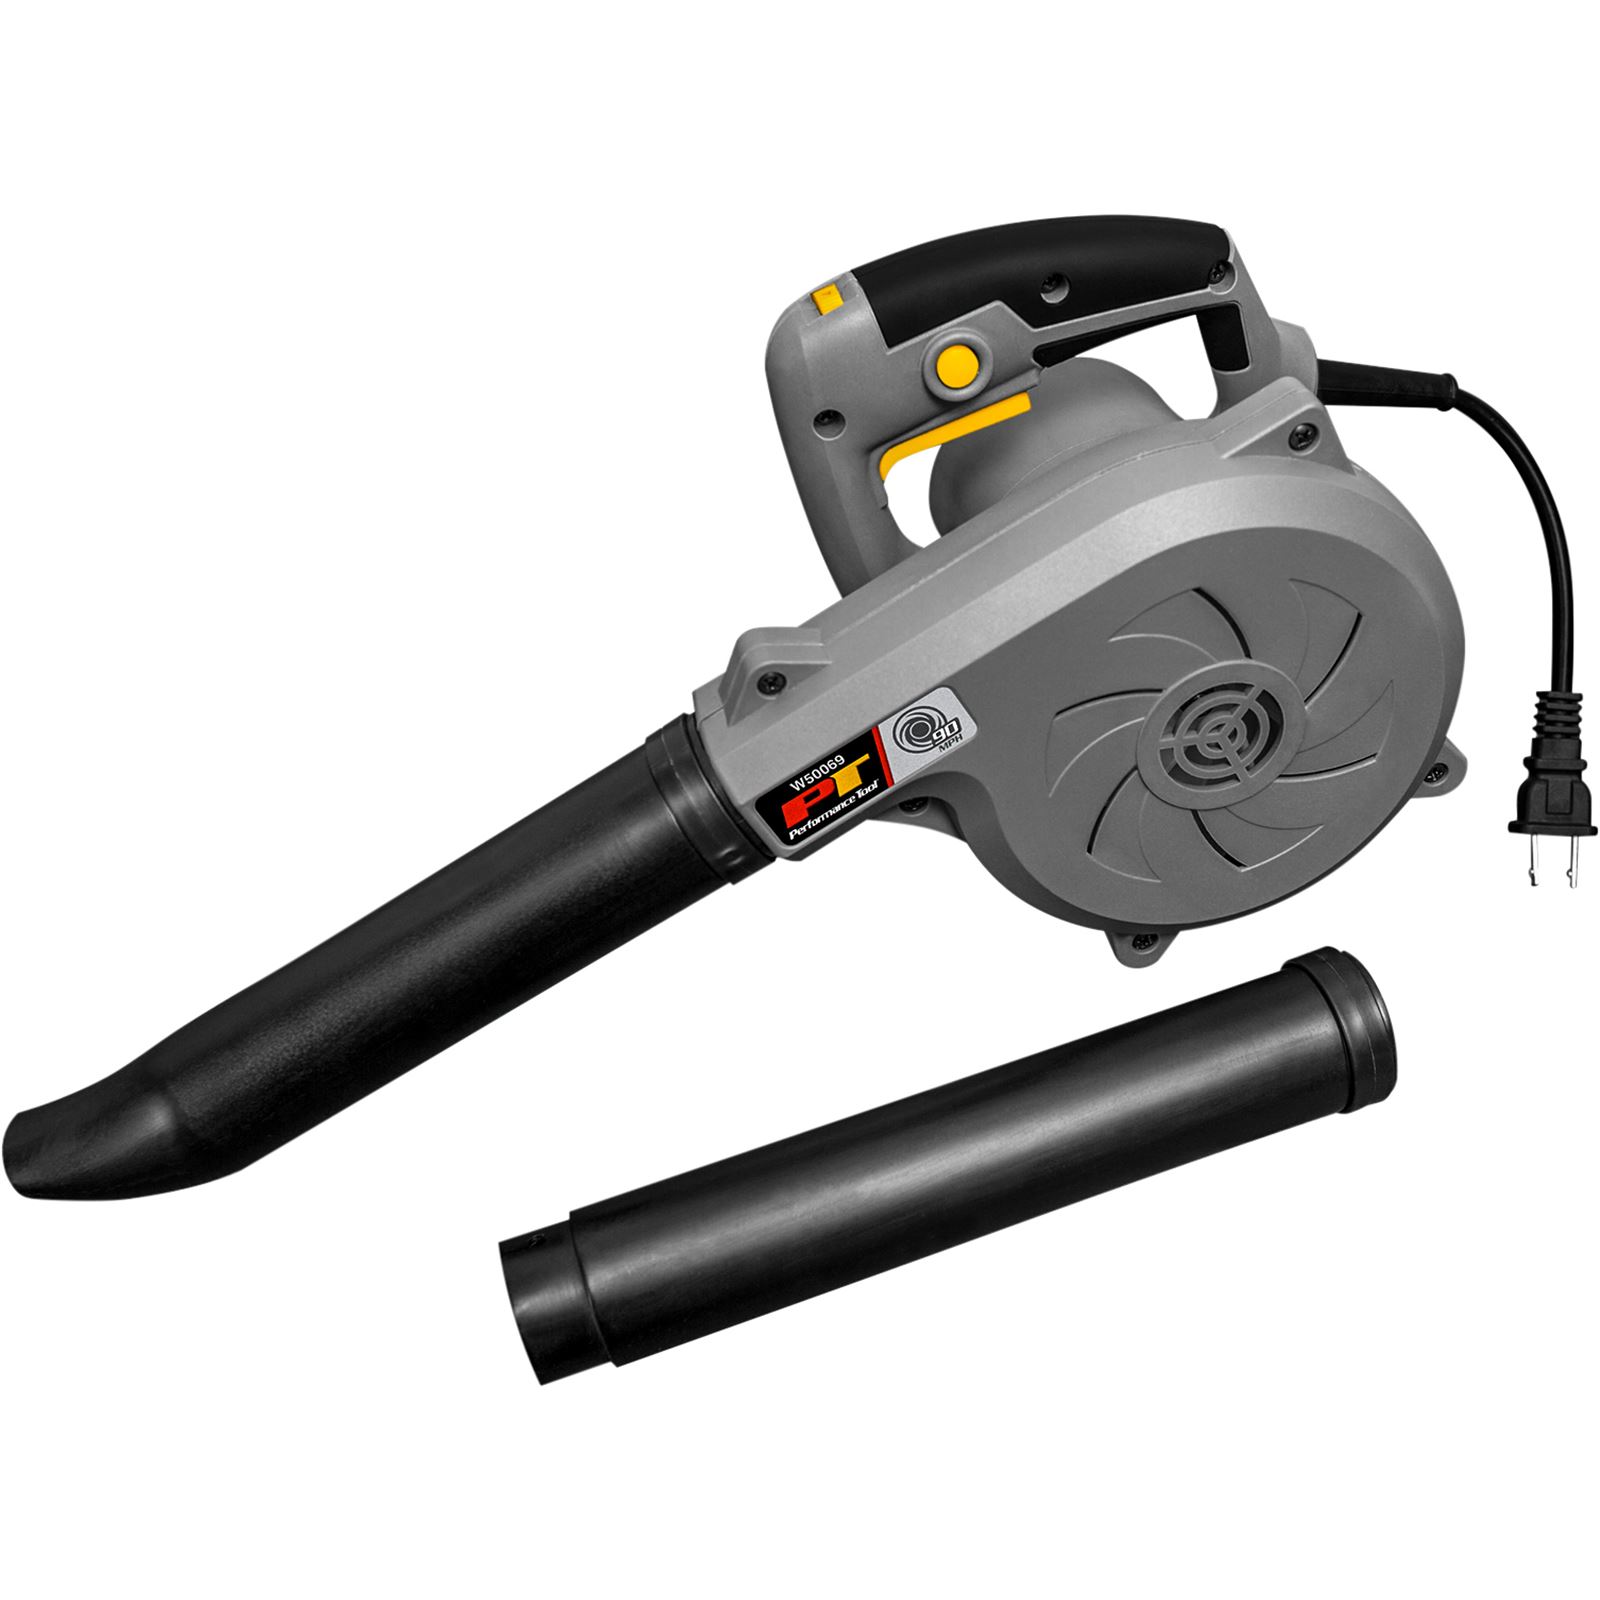 Performance Variable Speed Blower 120v/700w